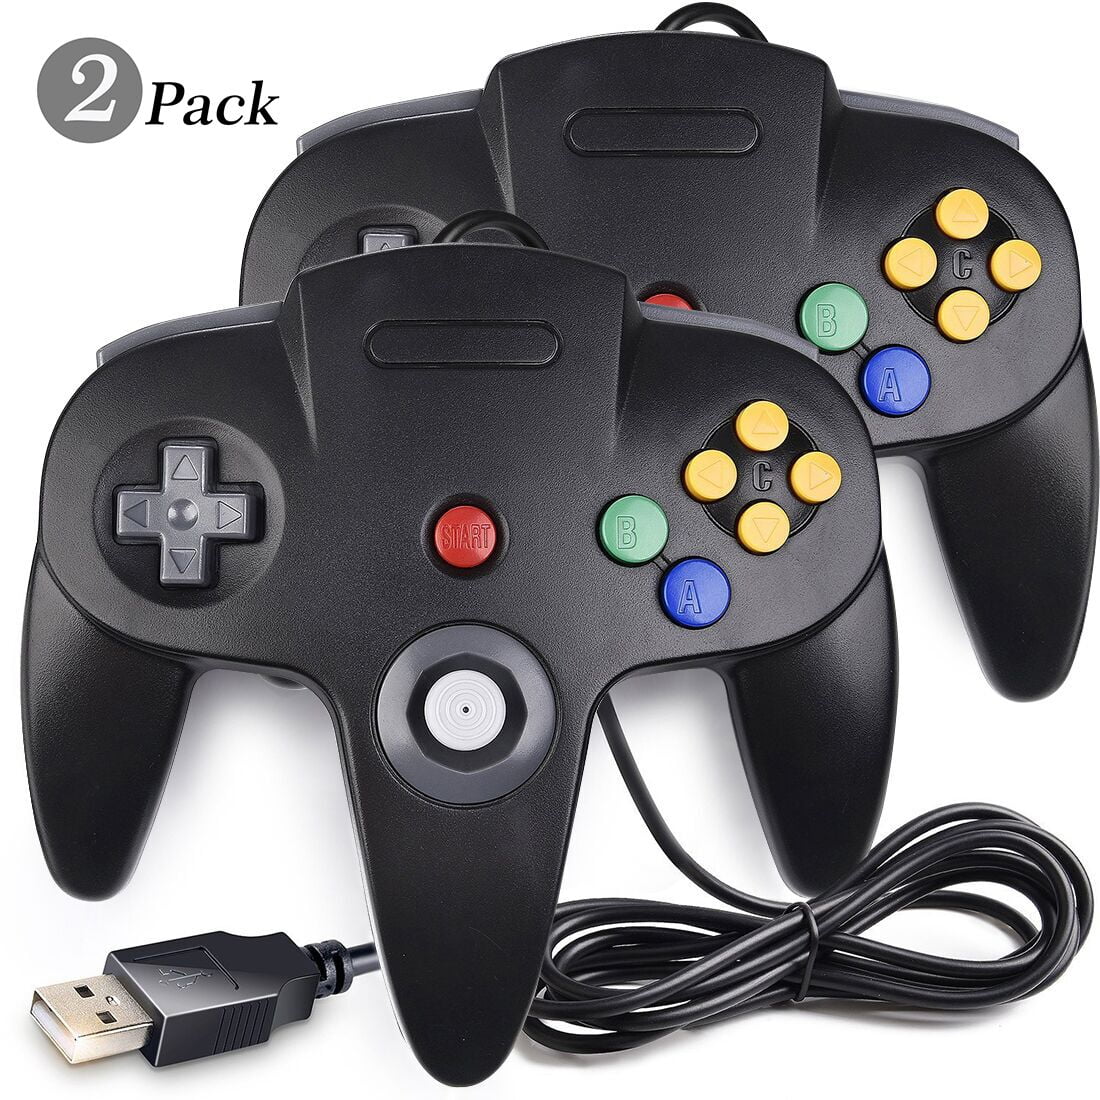 Innext Usb N64 Controller 2 Pack Classic Retro N64 Wired Usb Pc